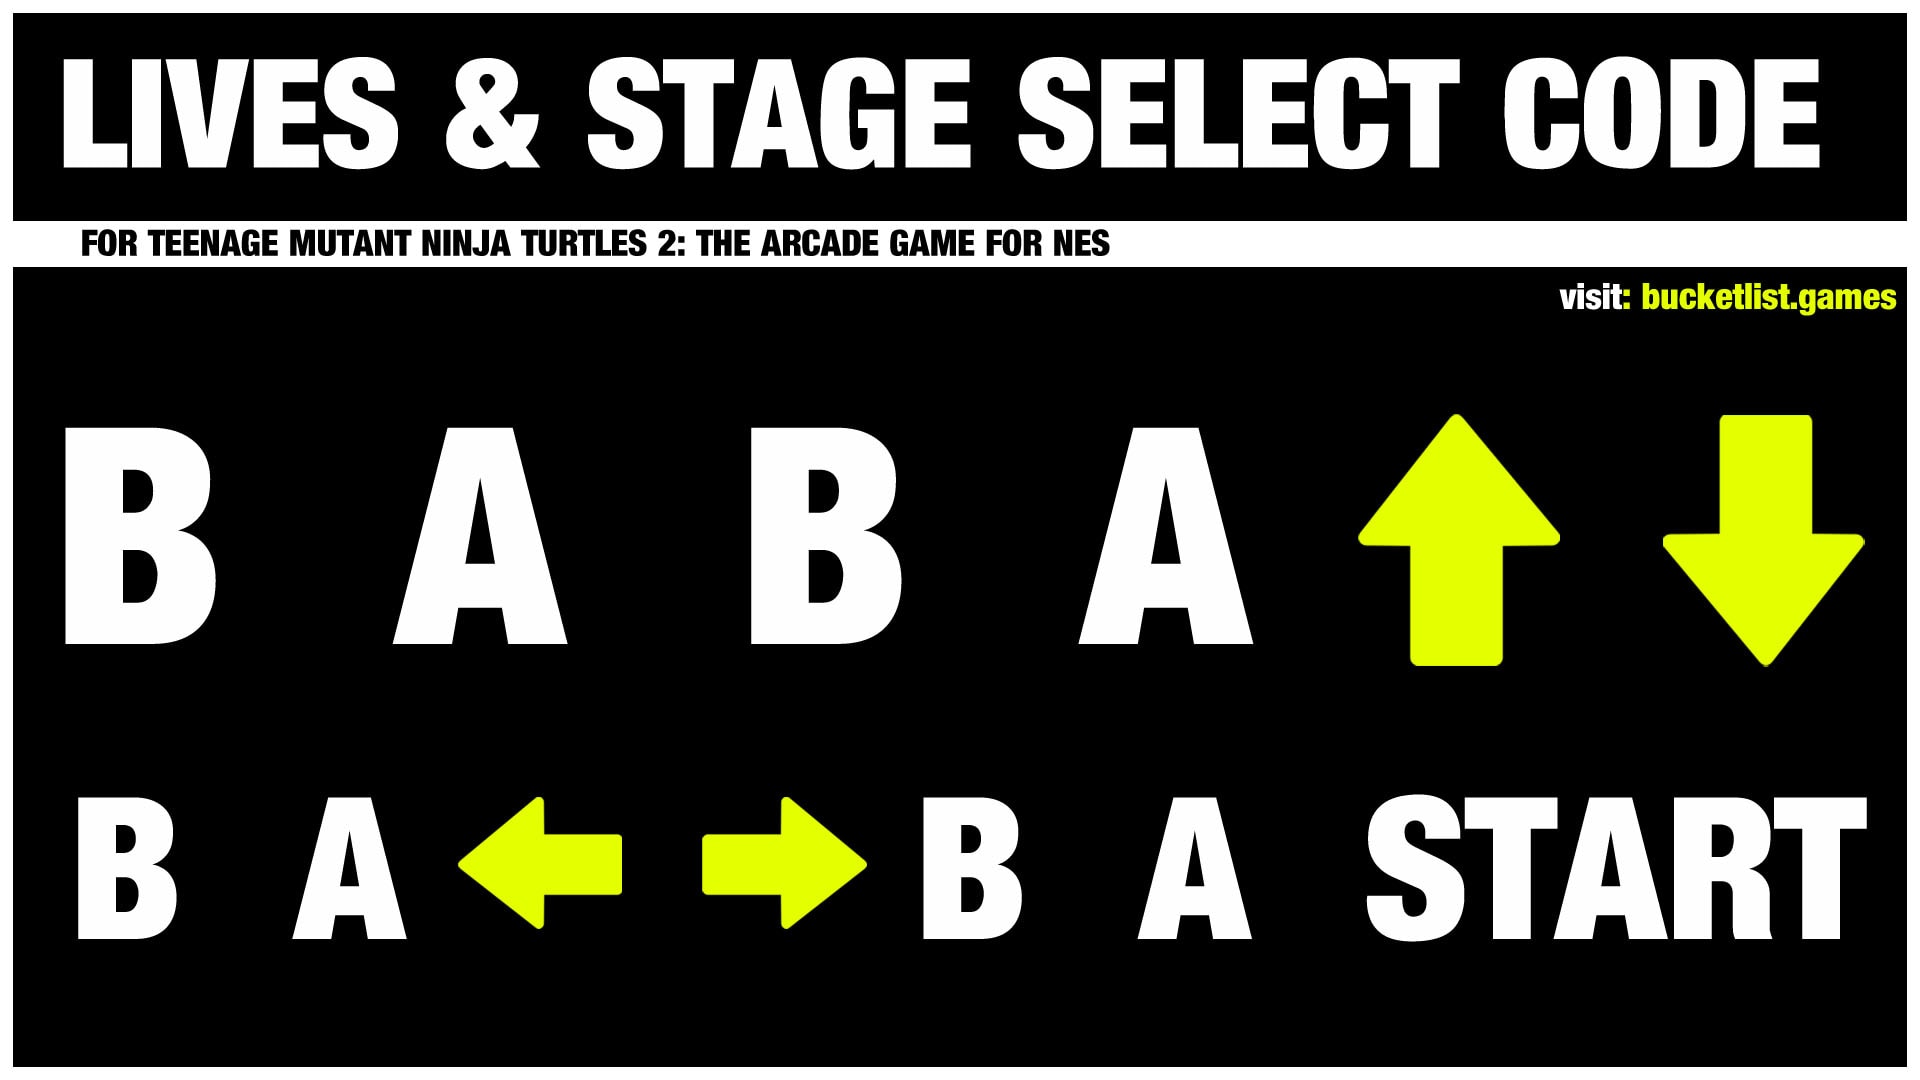 Stage Select and Extra lives code text on black background